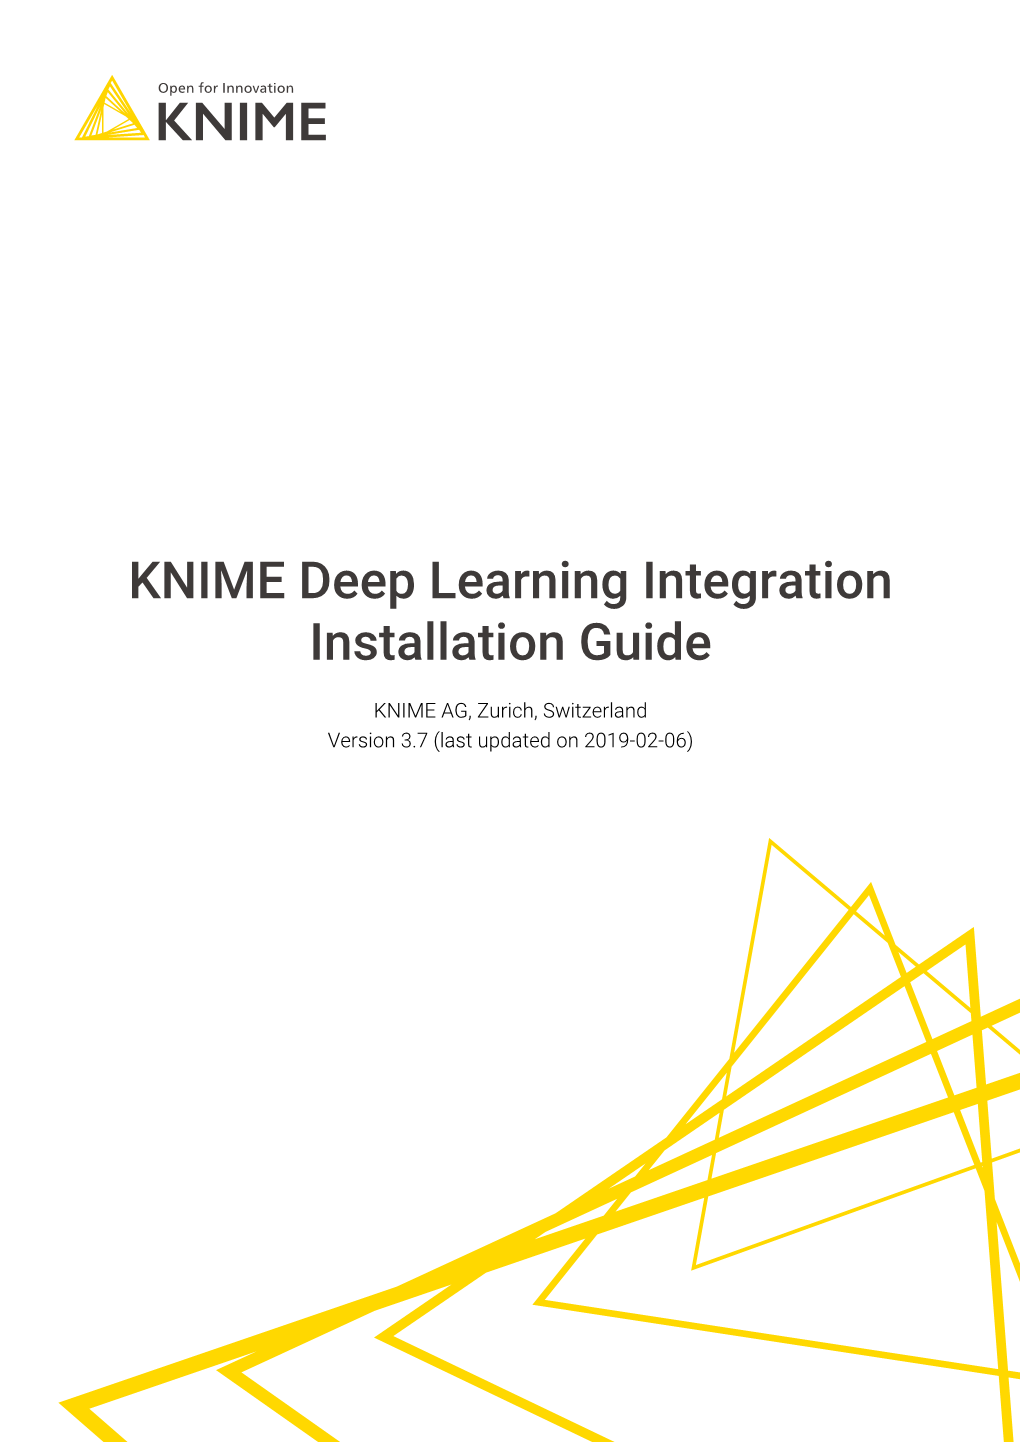 KNIME Deep Learning Integration Installation Guide